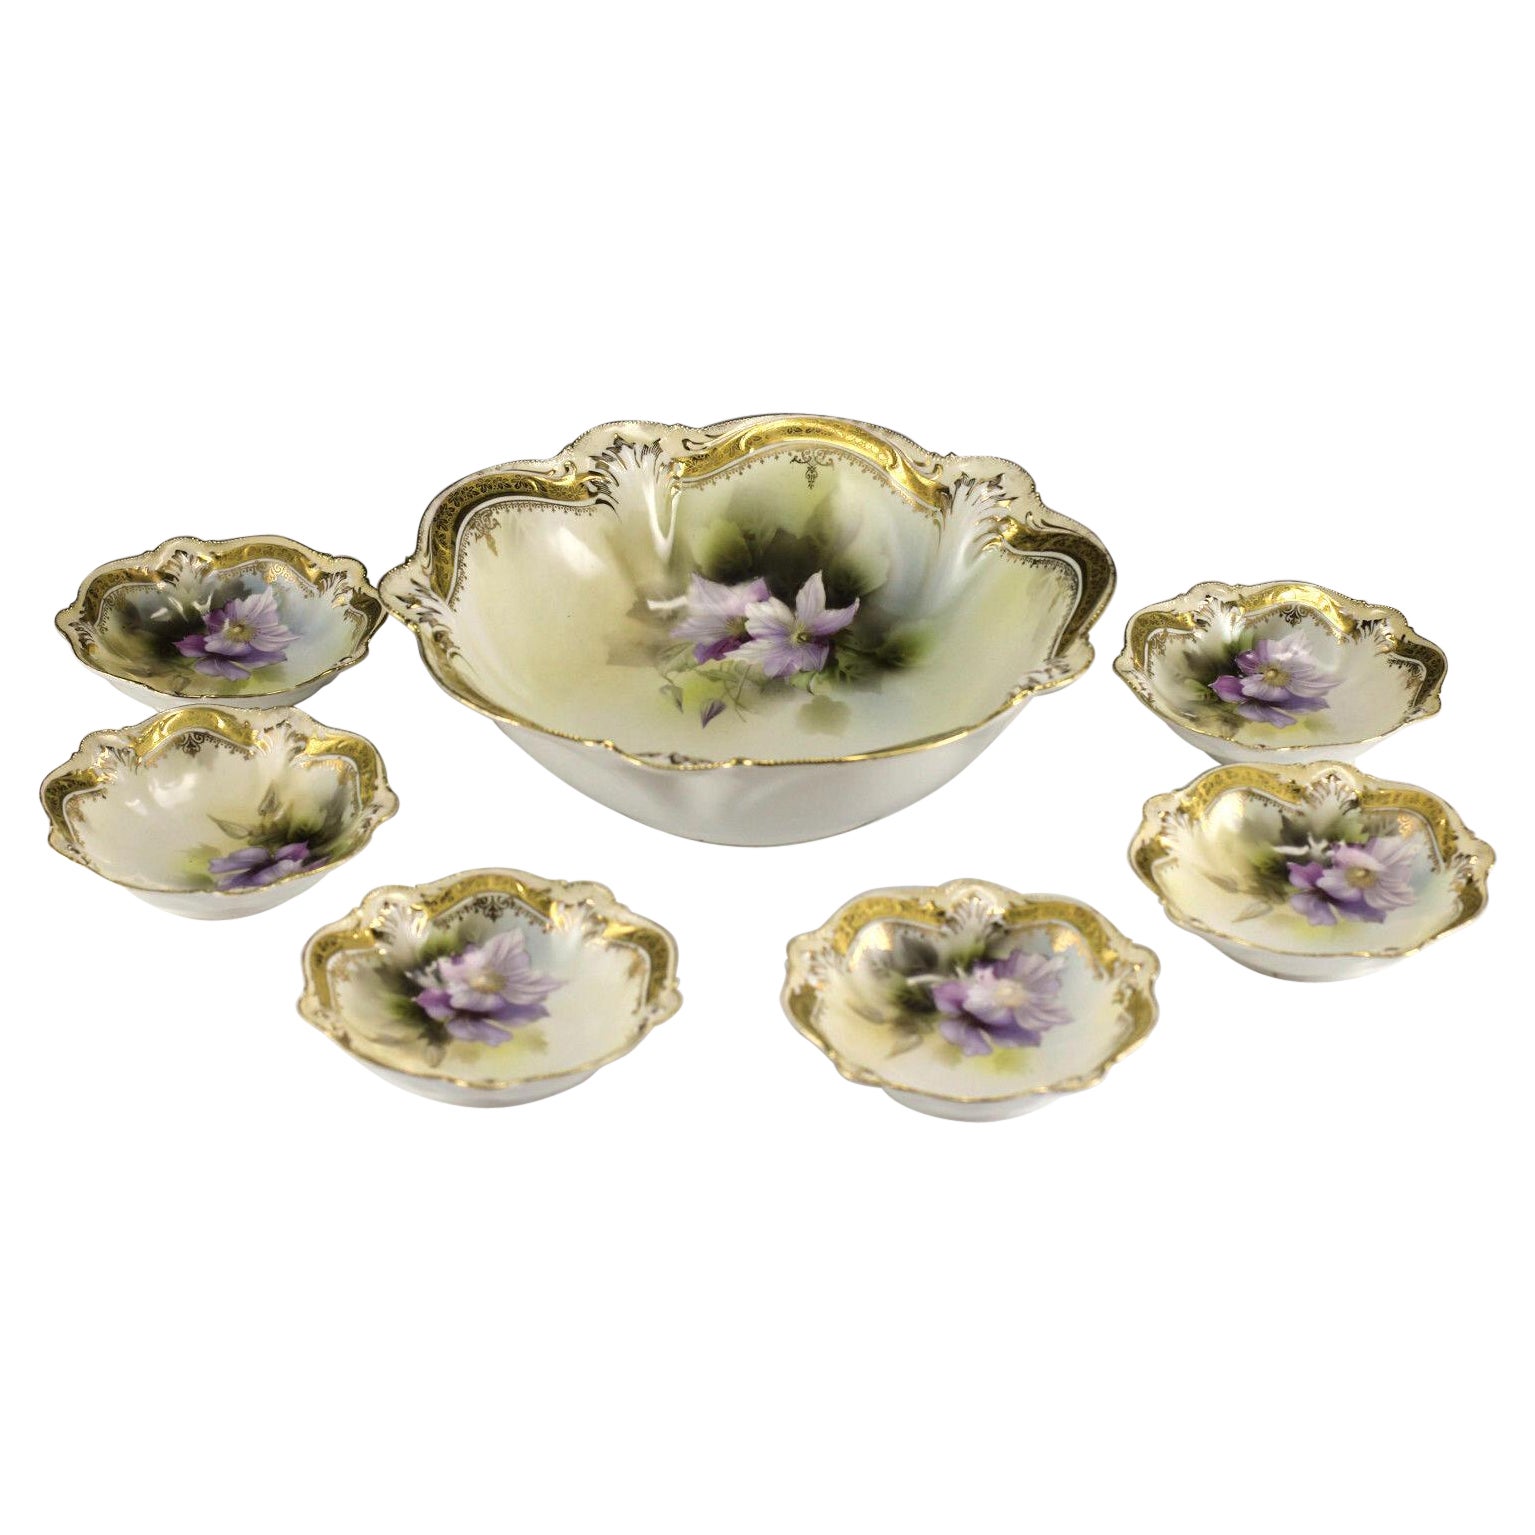 7 Pc Set R S Prussia Porcelain Berry Serving & Small Bowls, Early 20th Century For Sale